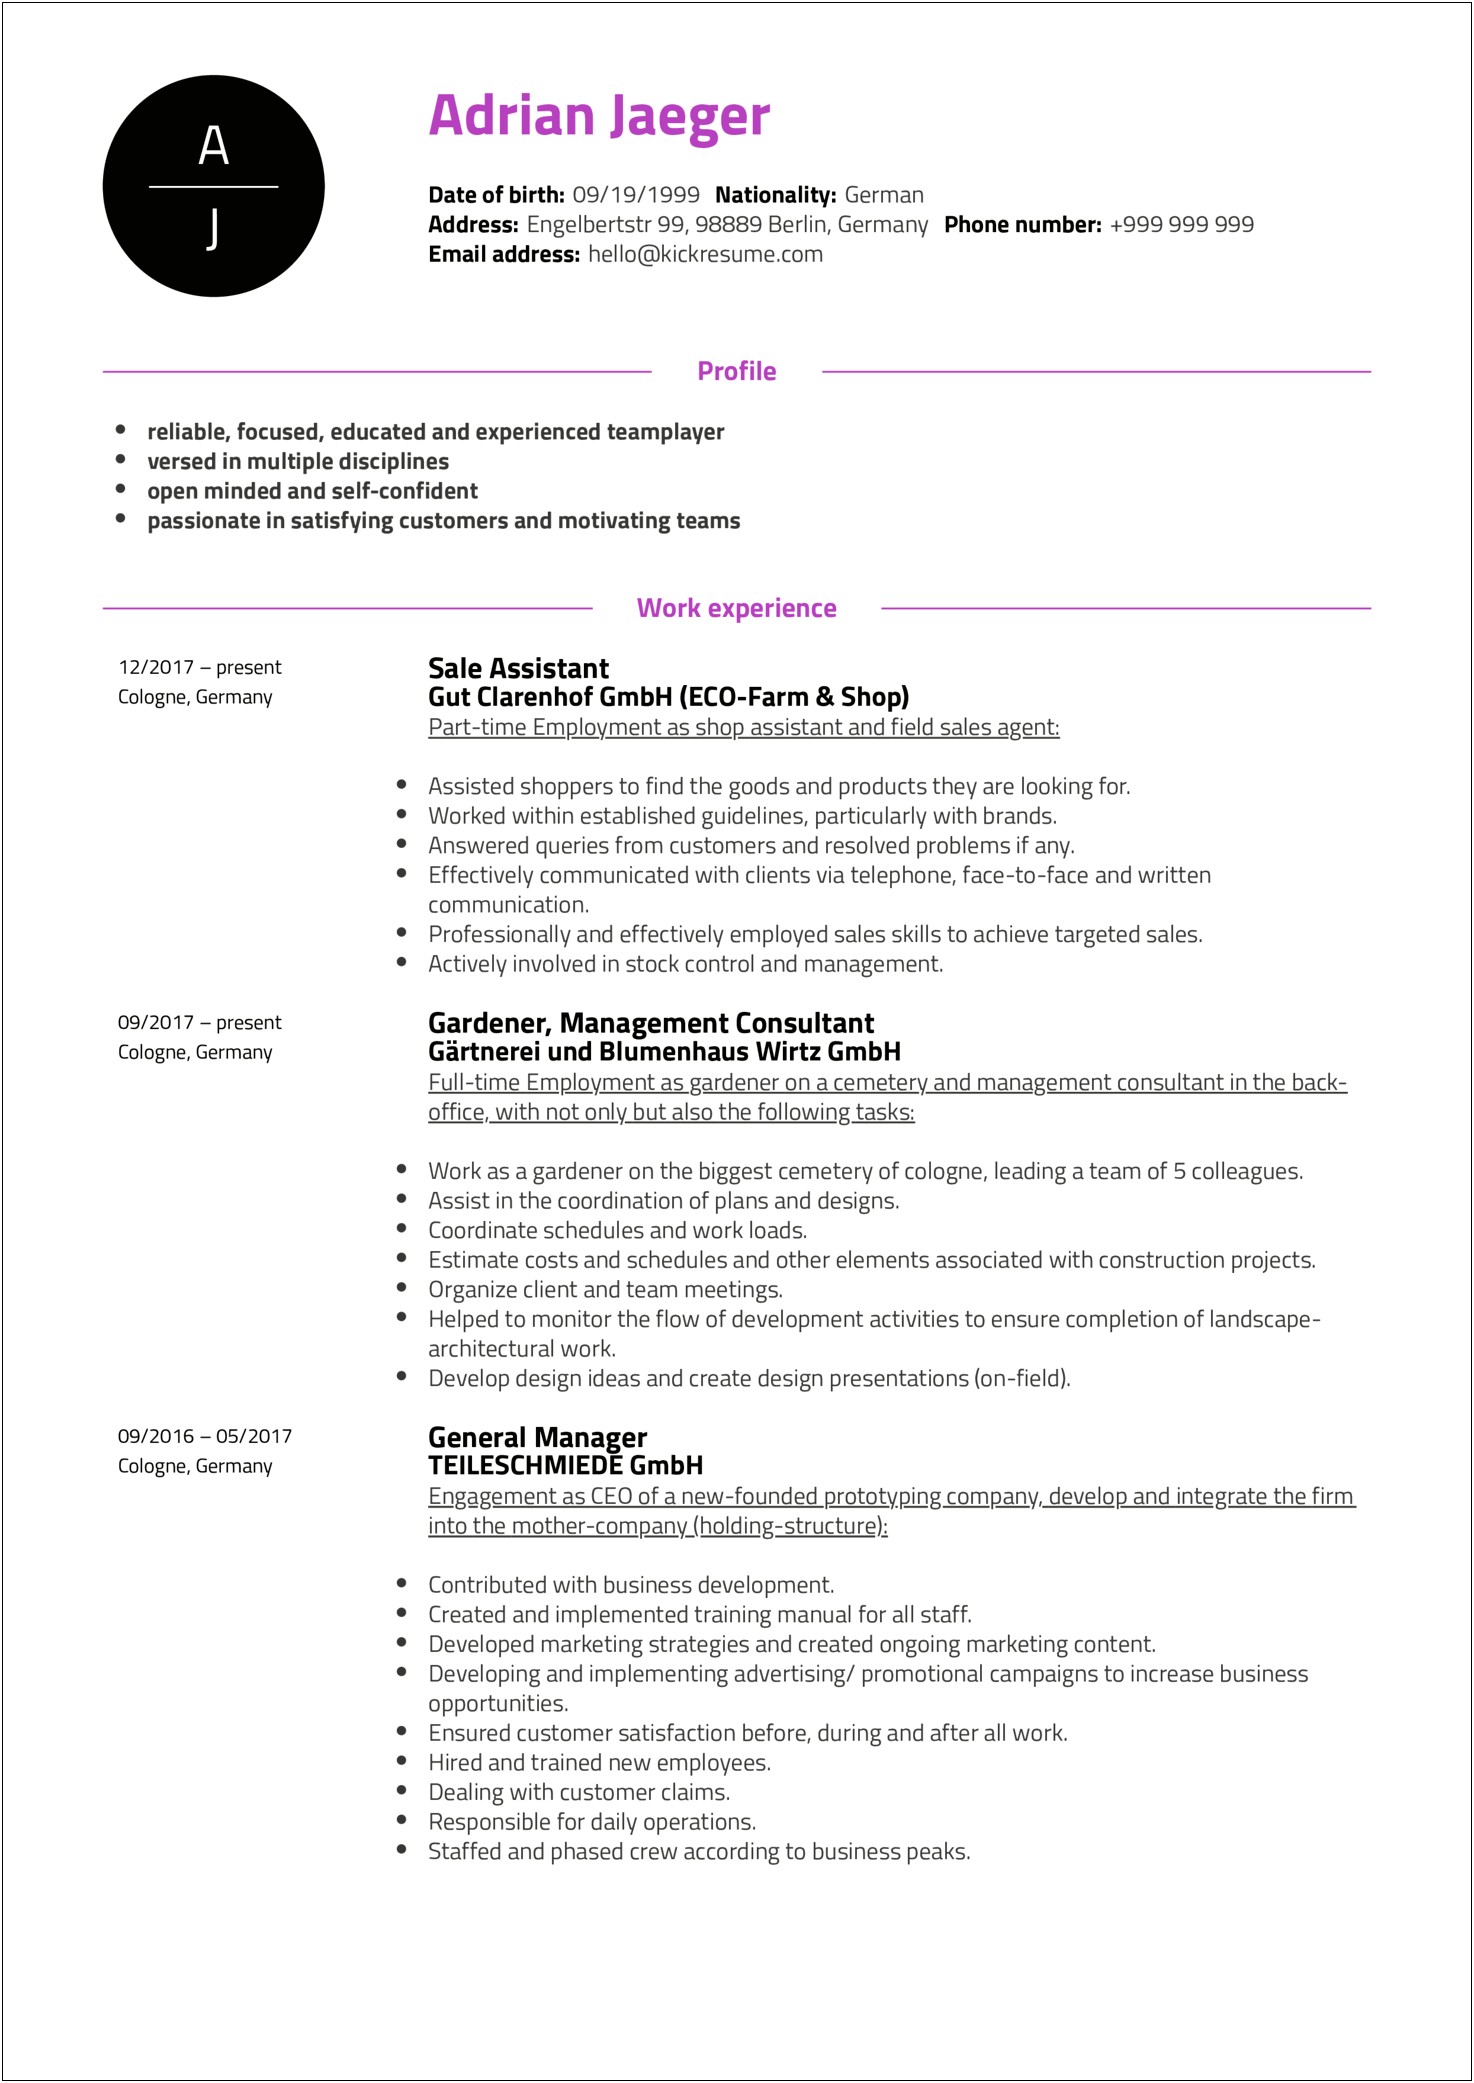 Resume Summary For Tecnical Support Professional